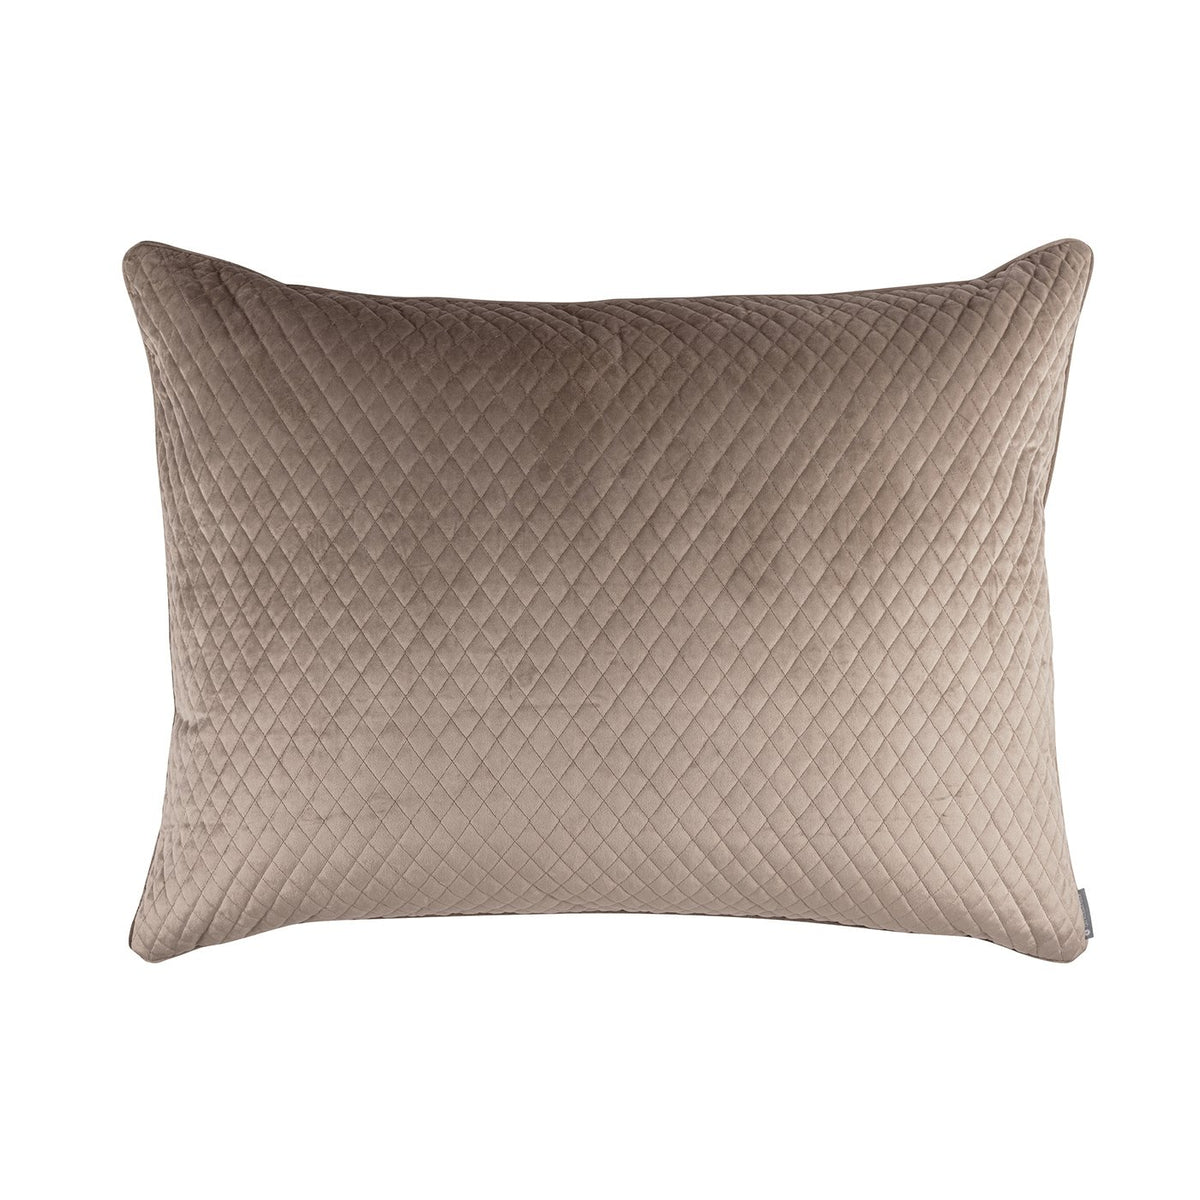 Valentina Buff Quilted Luxe Euro Pillow by Lili Alessandra